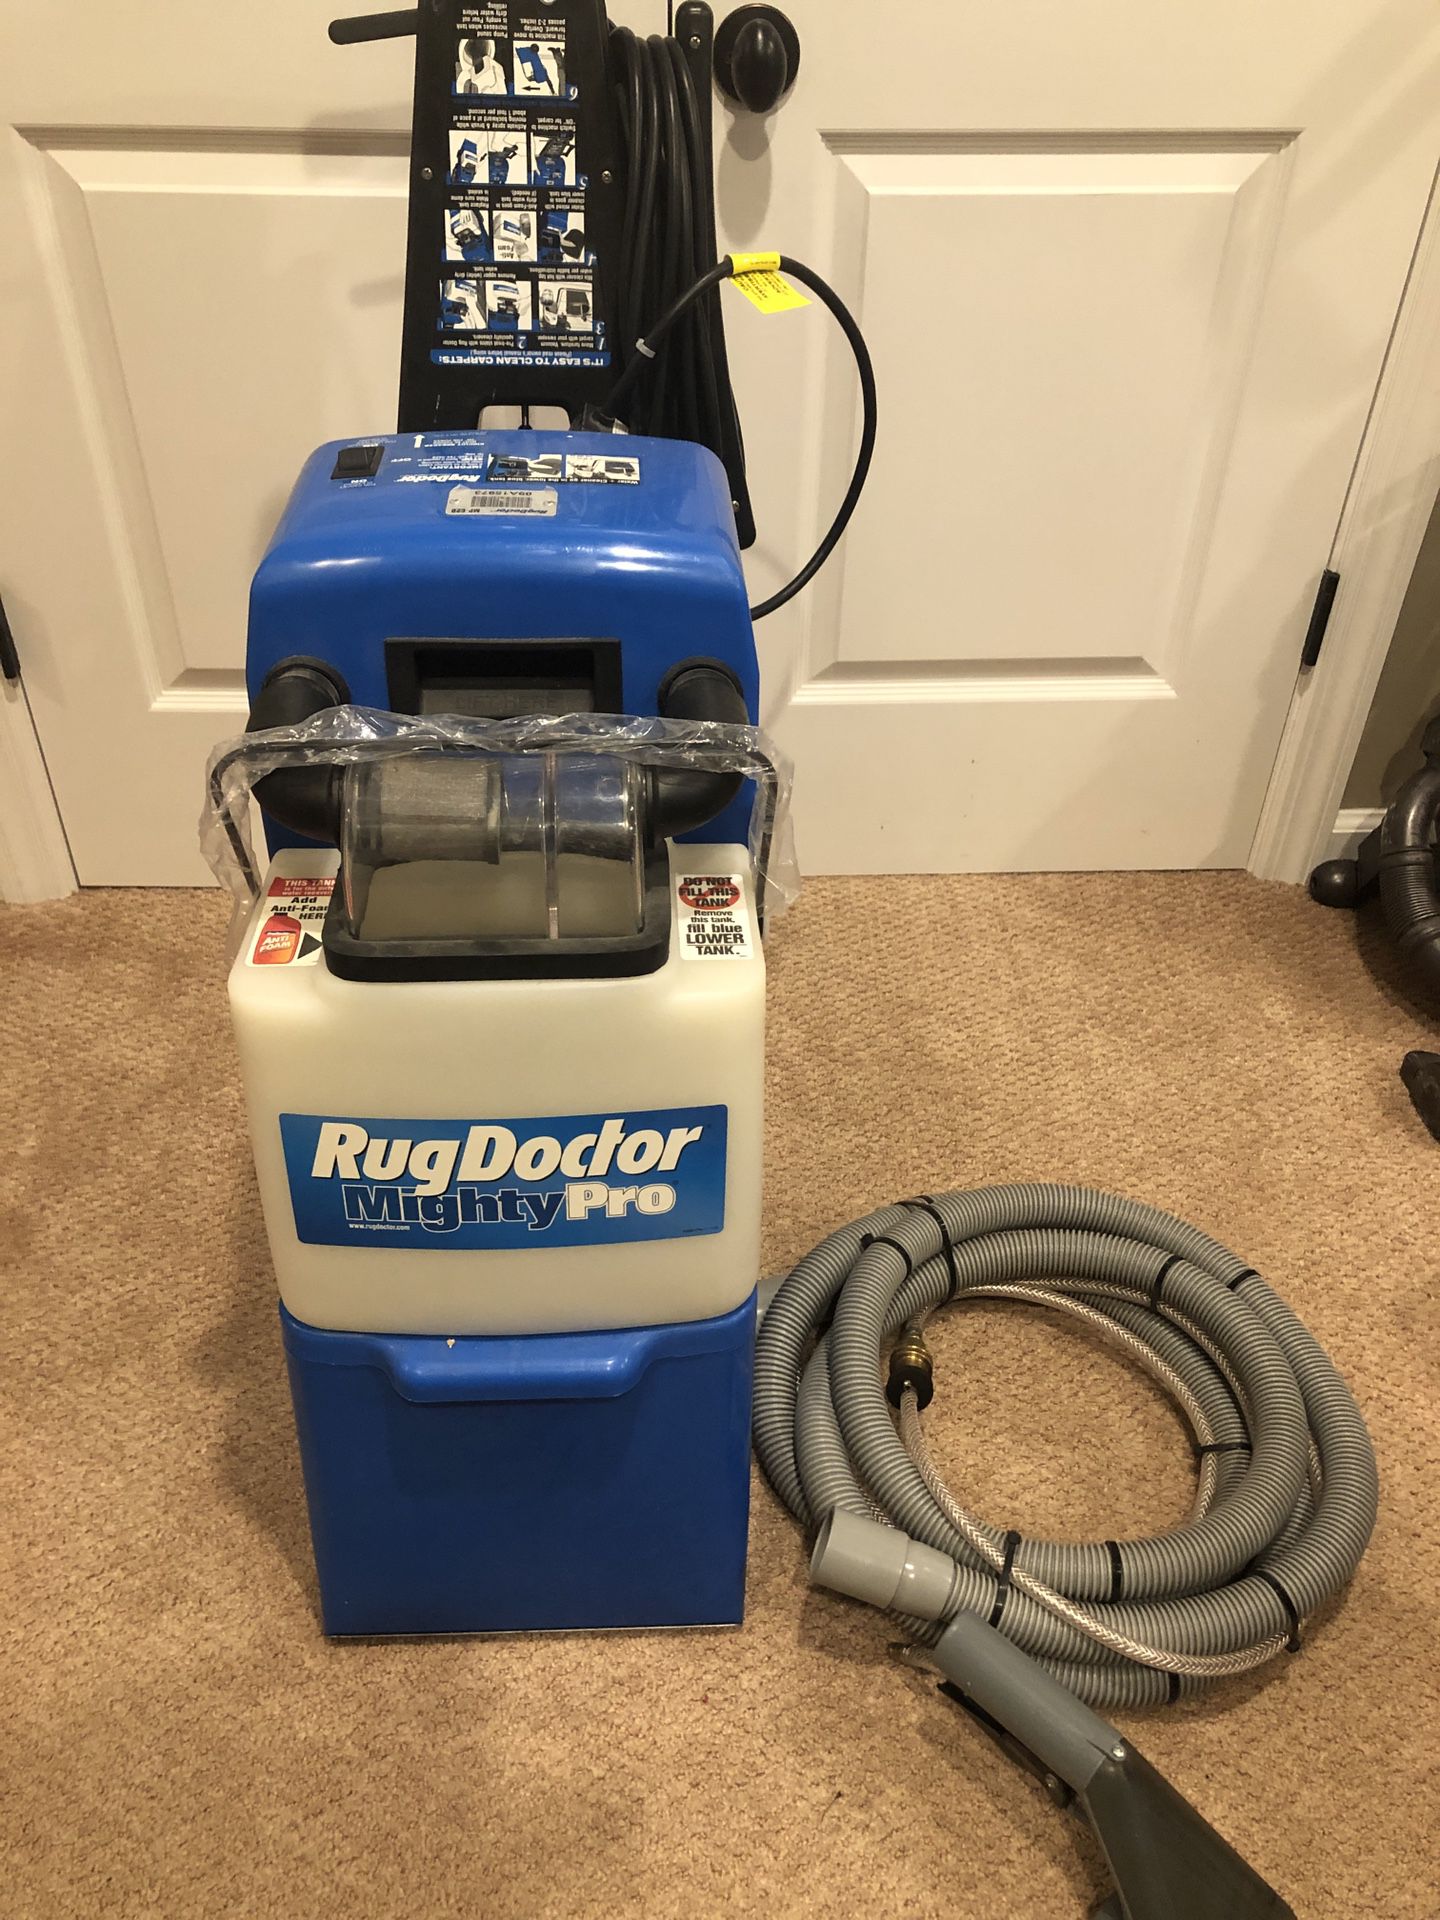 RugDoctor Mighty Pro Blue Model MP-C2D